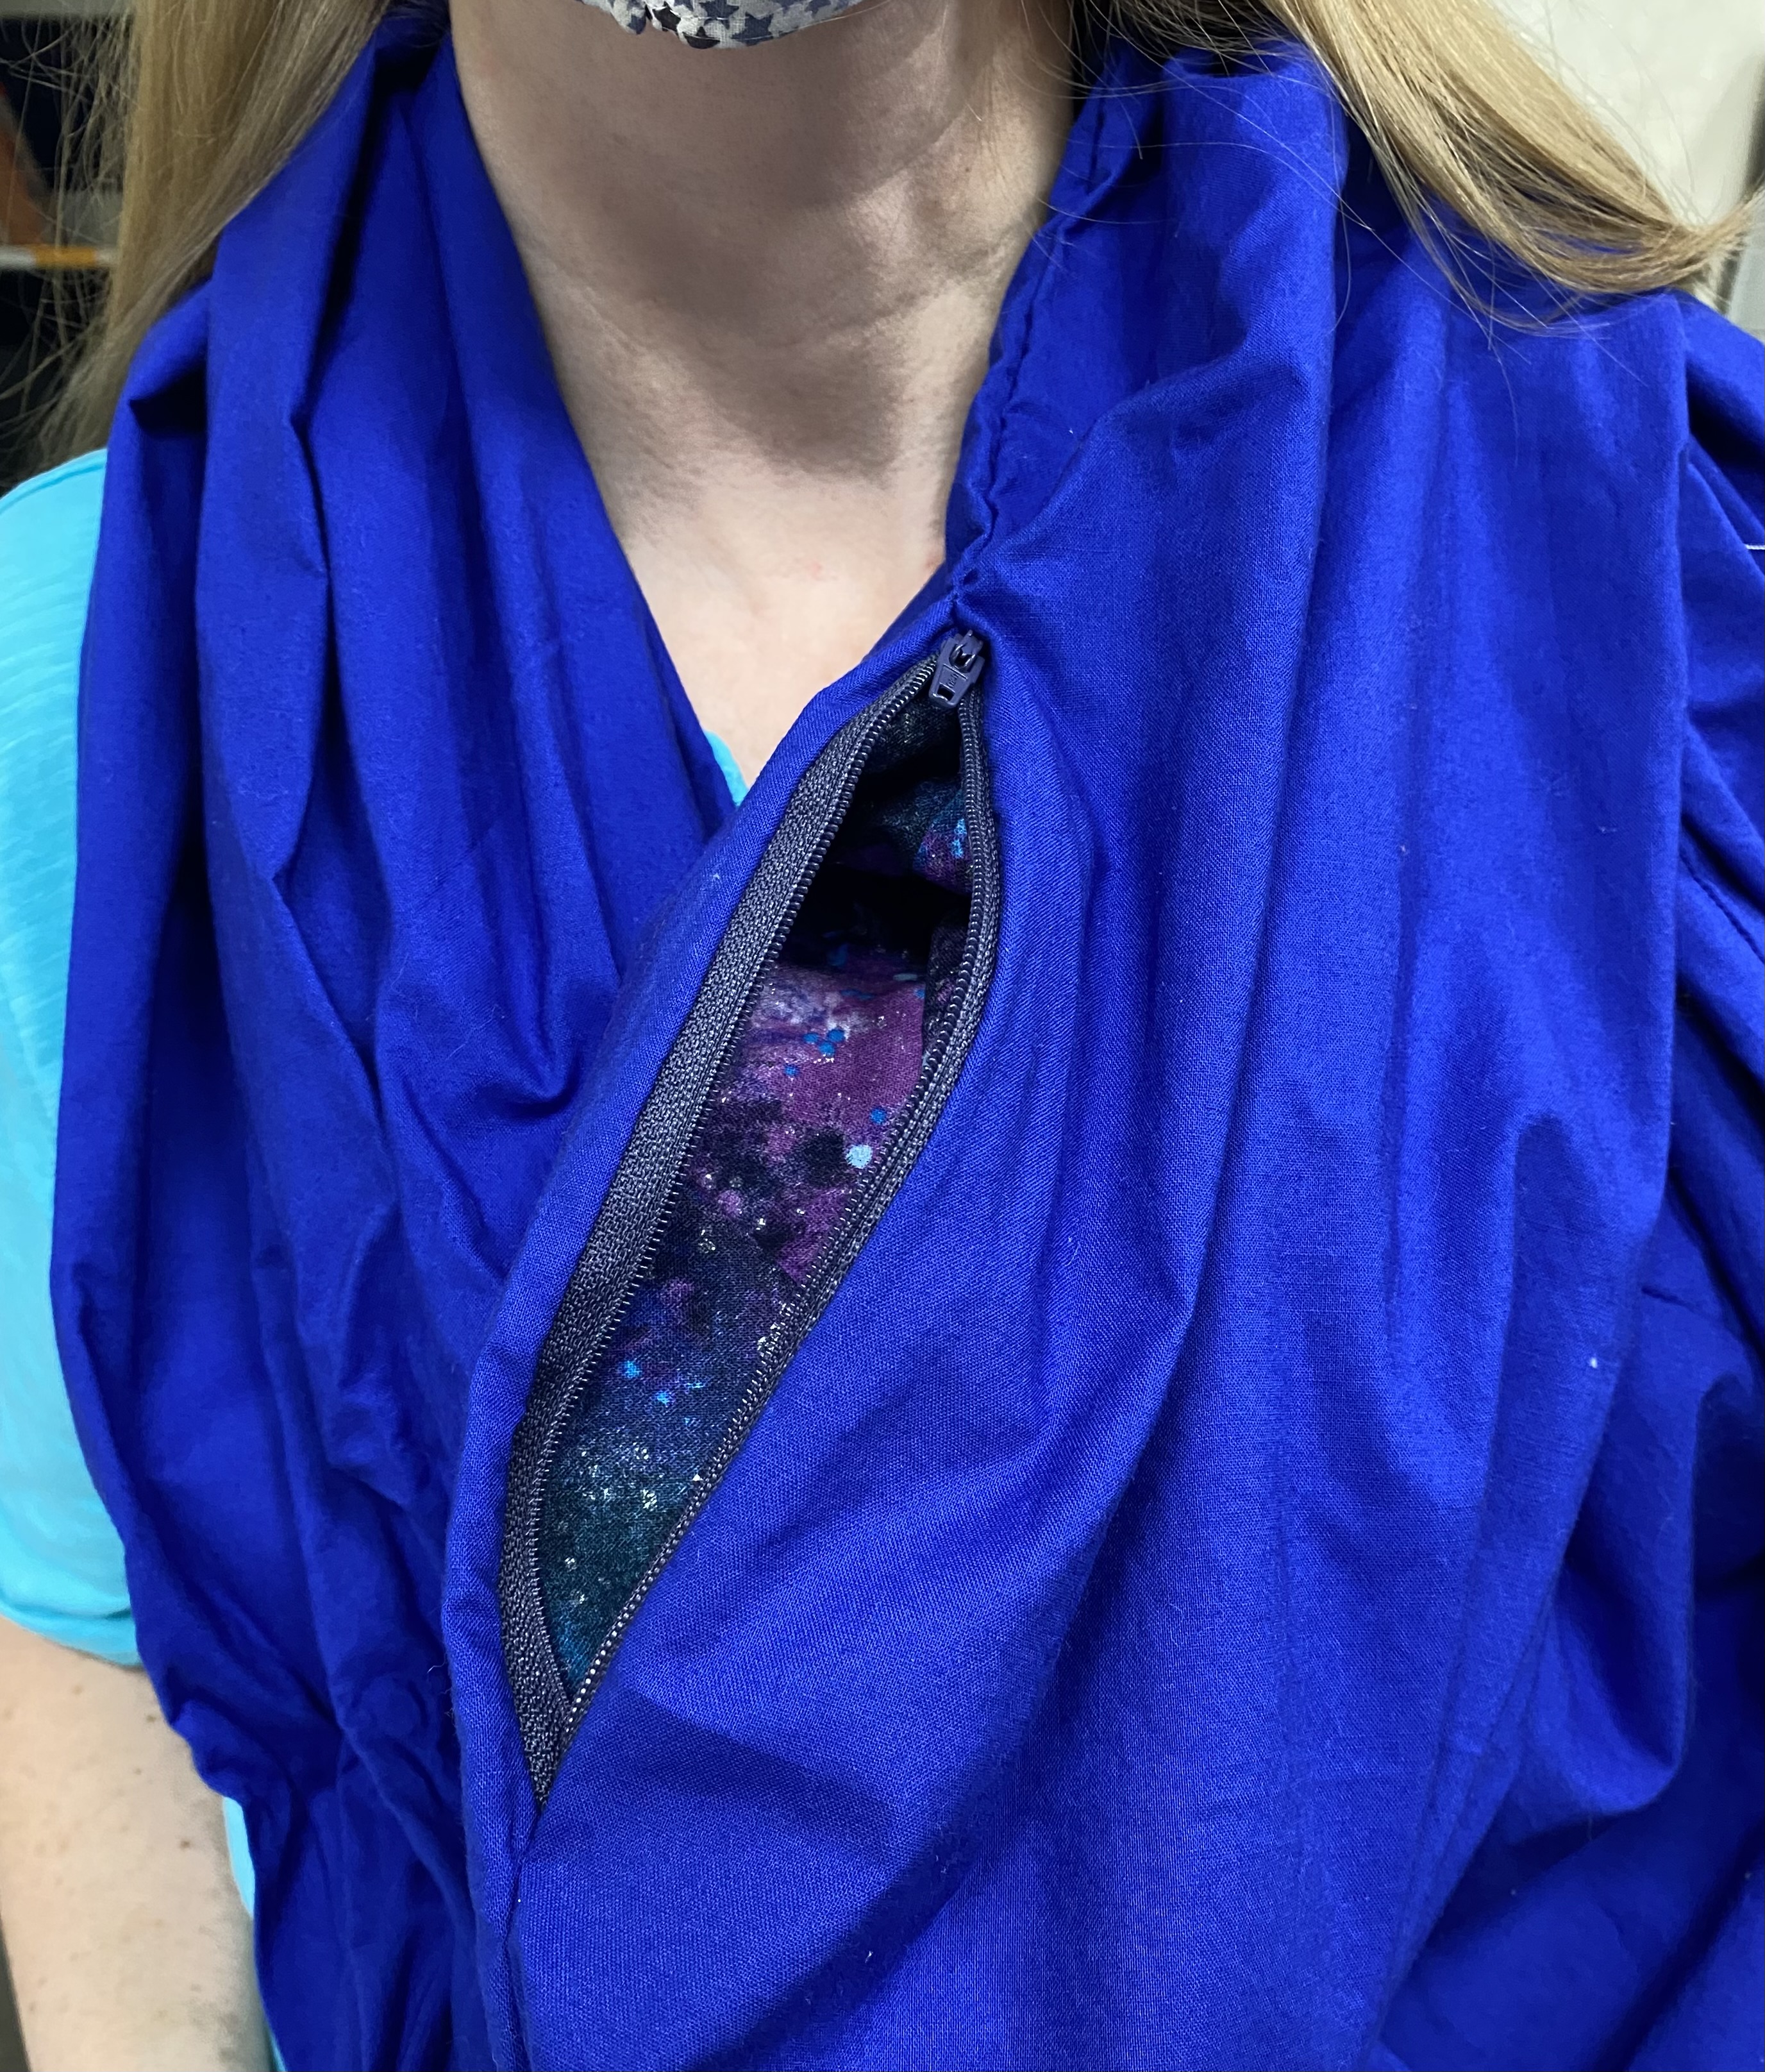 Come sew an infinity scarf for a gift or keep it for yourself! The hidden zipper pocket will allow you to secretly store your phone, small wallet, or event your library card!